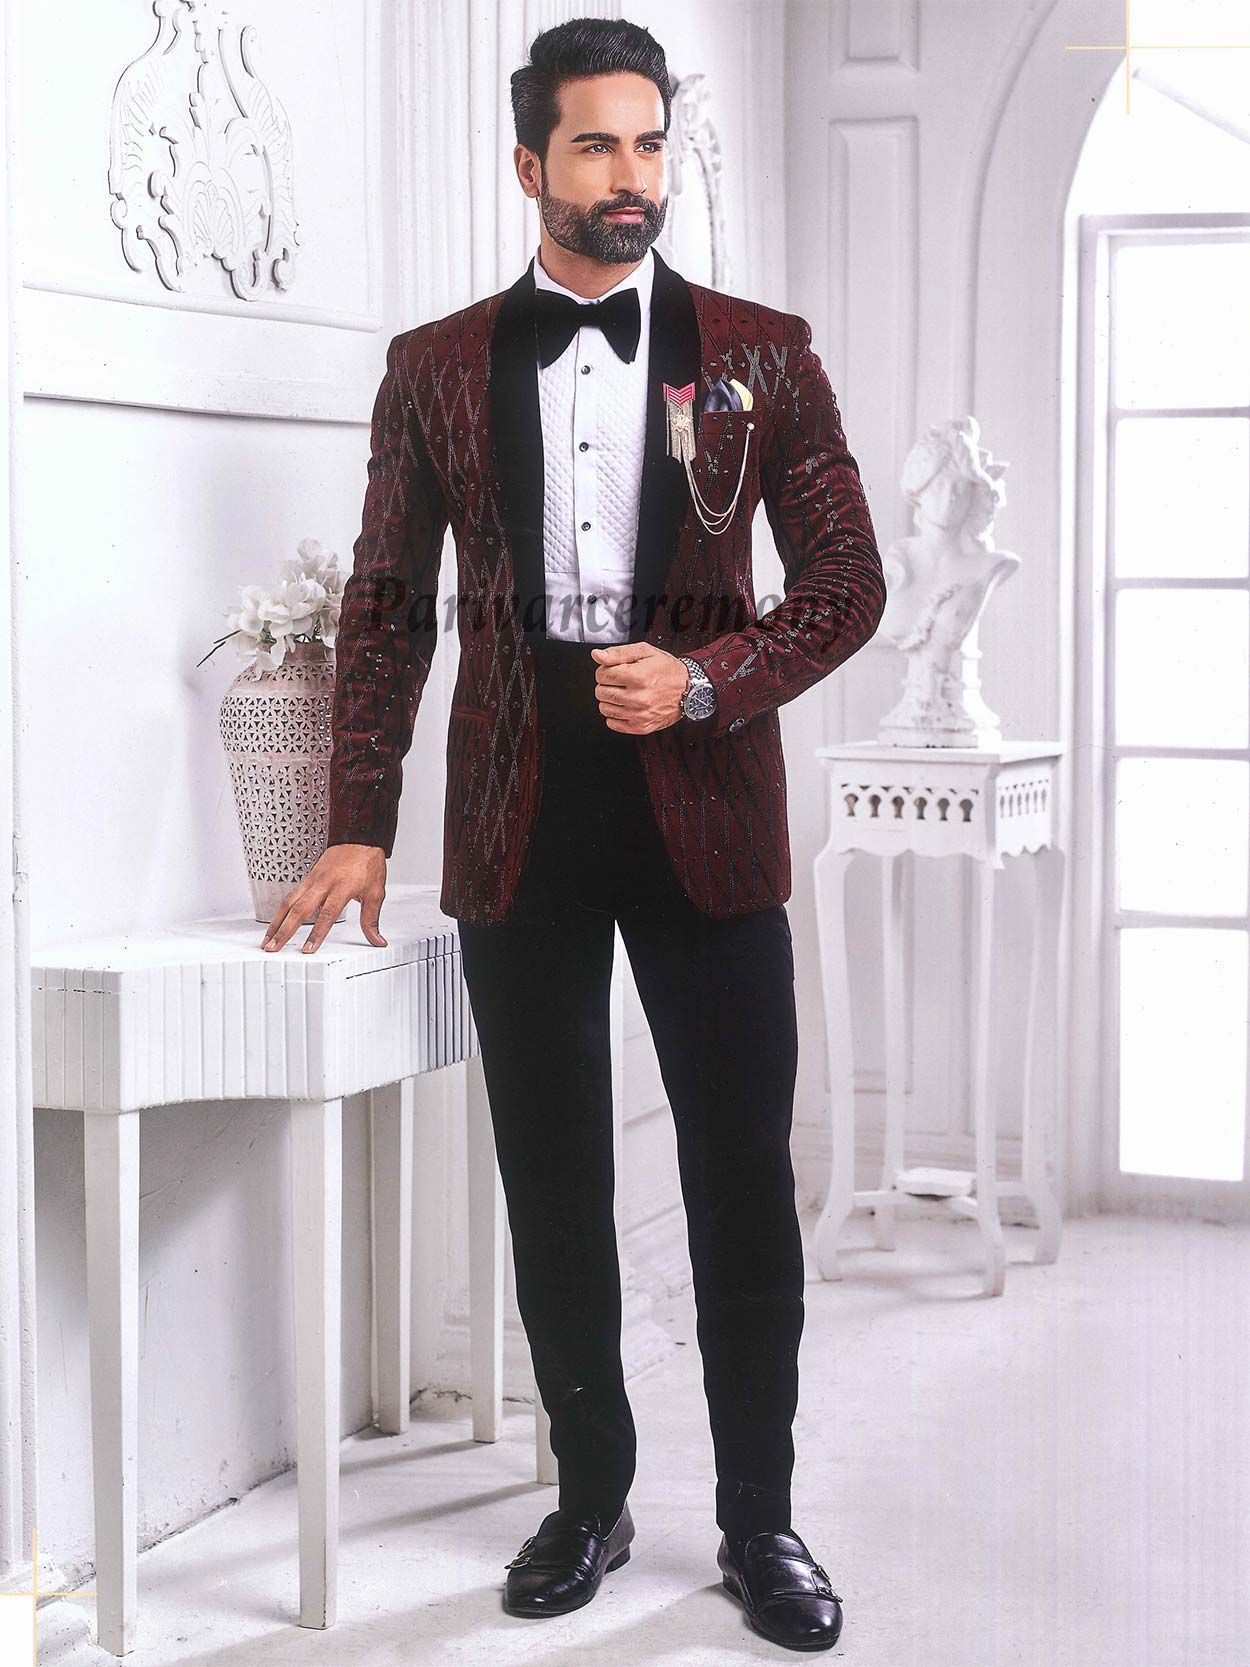 Maroon Colour Mens Wedding Suit in Imported Fabric.